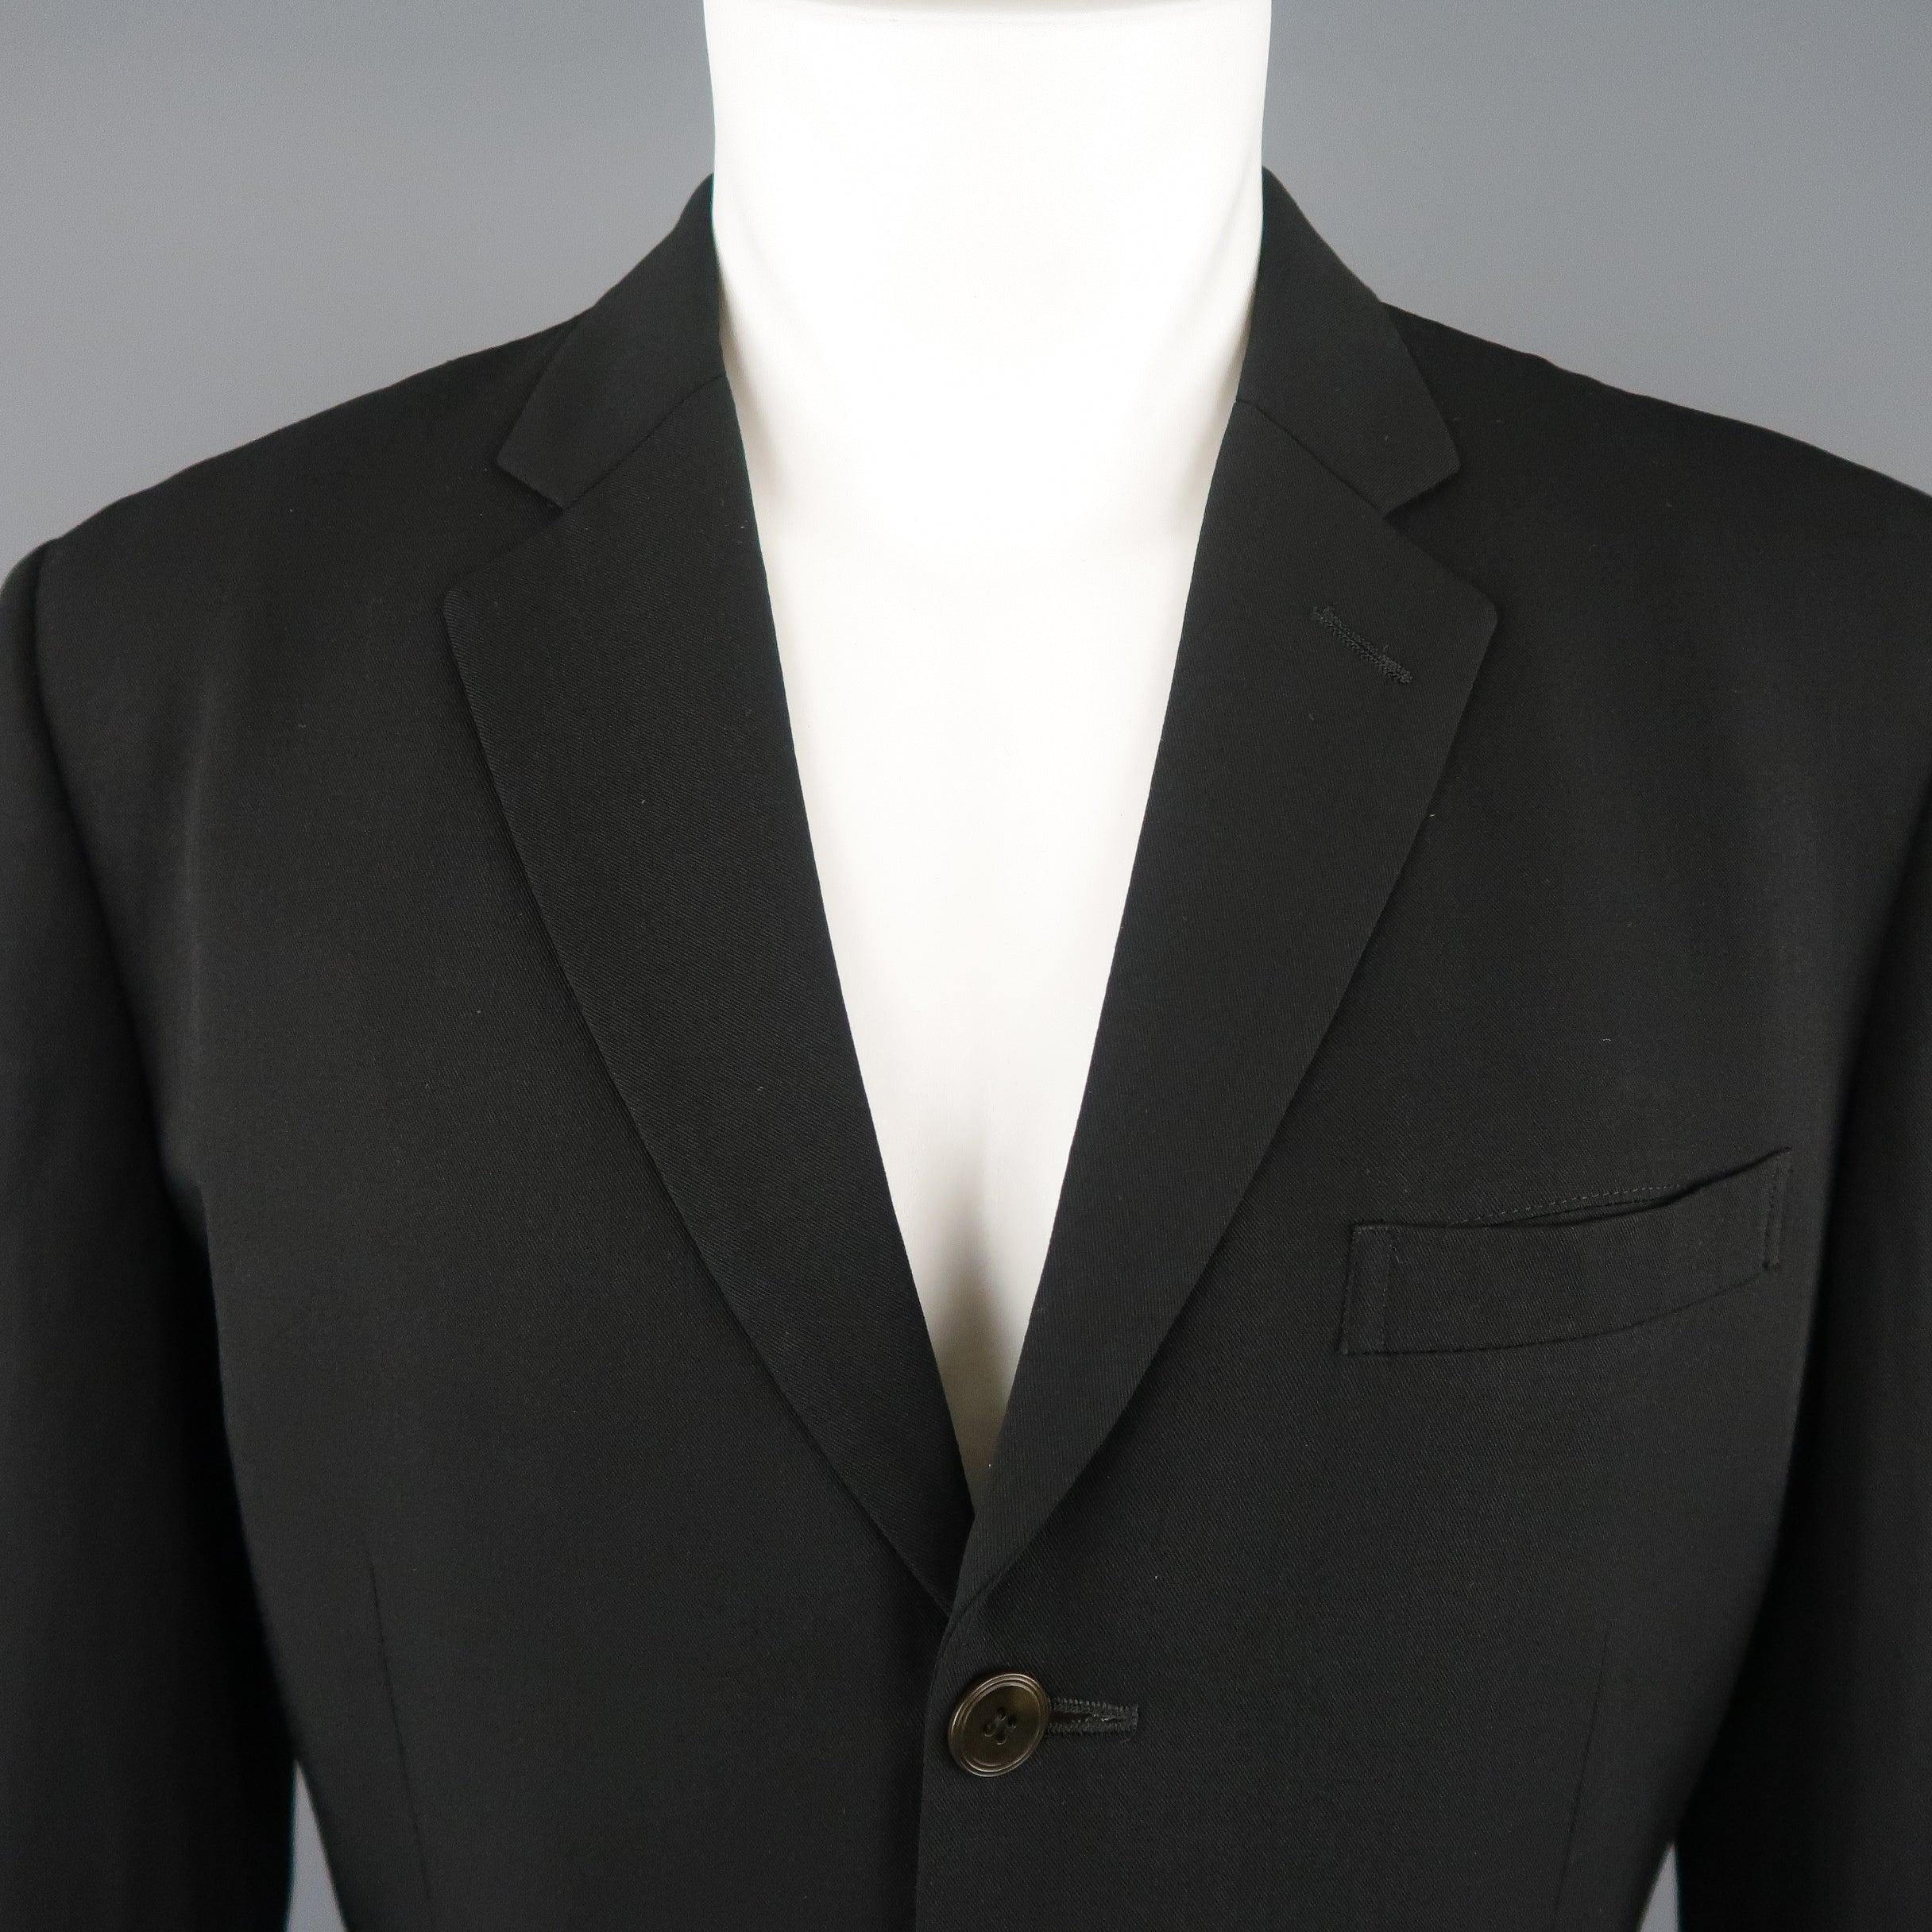 Vintage 1980's OBJET by JEAN PAUL GAULTIER sport jacket comes in wool twill with a notch lapel, three button single breasted front, flap pockets, ventless back, and signature tab detail. 
Very Good Pre-Owned Condition.
 

Marked:   IT 48 M
